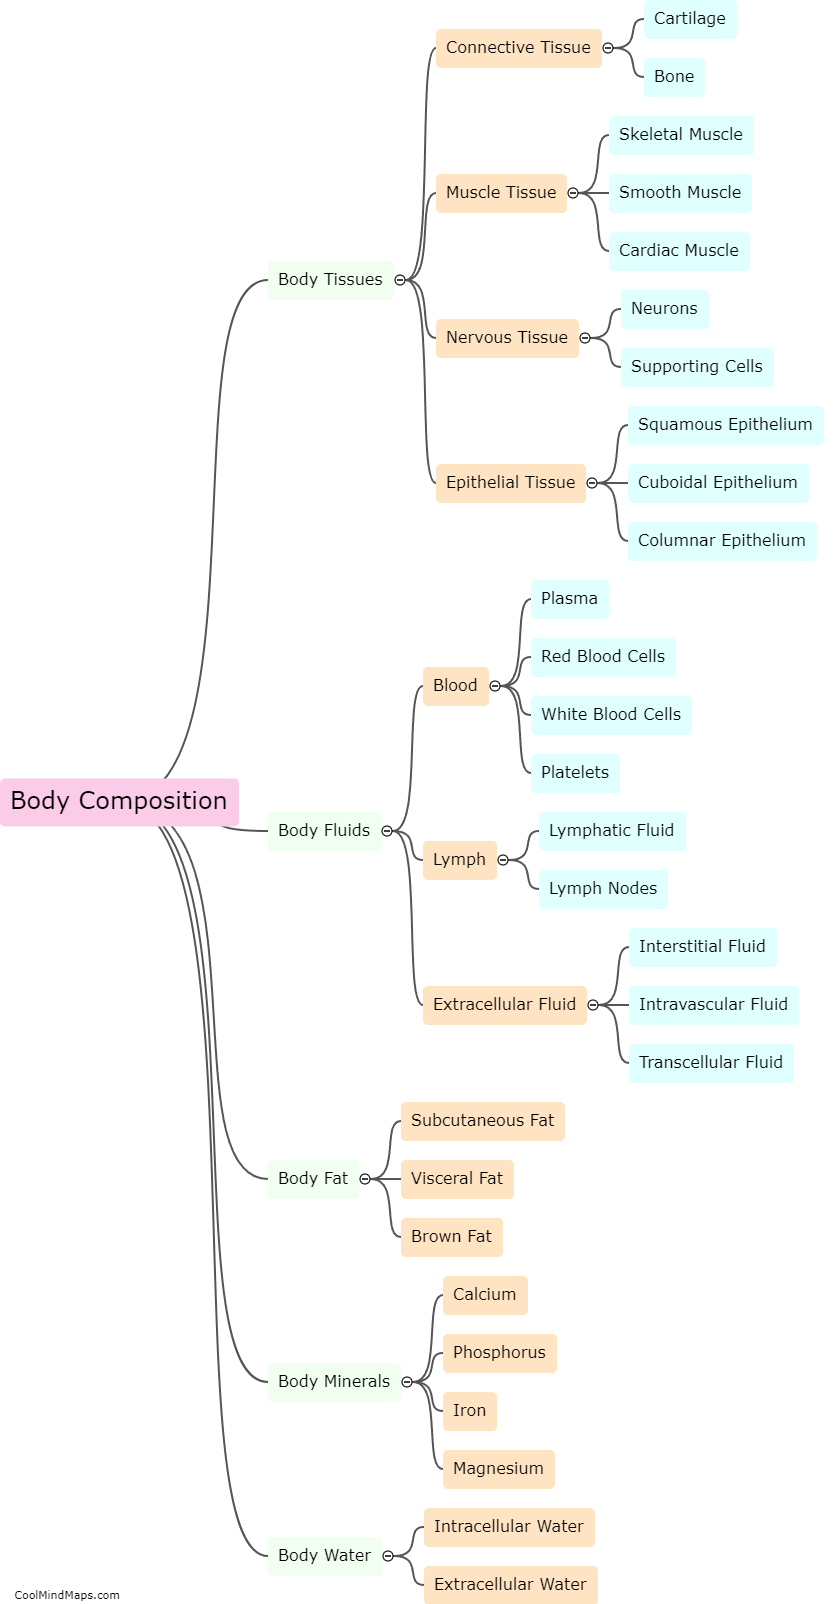 What is the composition of a body?